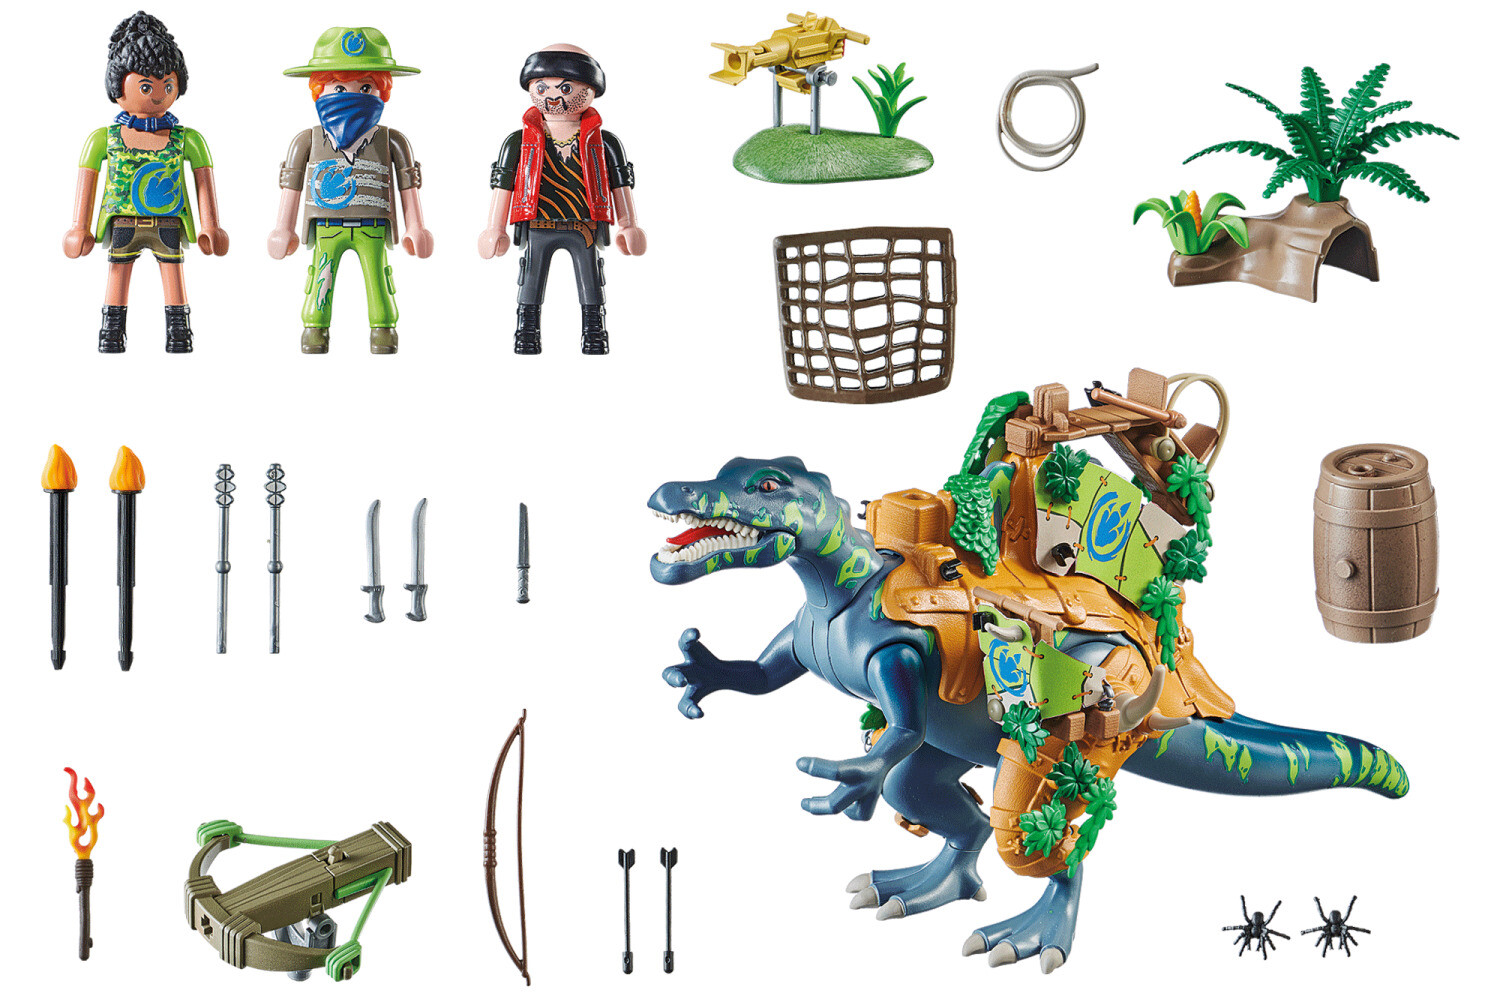 https://content.pearl.be/media/cache/default/article_ultralarge_high_nocrop/shared/images/articles/T/TG2/playmobil-dino-rise-spinosaure-et-combattants-ref_TG2824_4.jpg